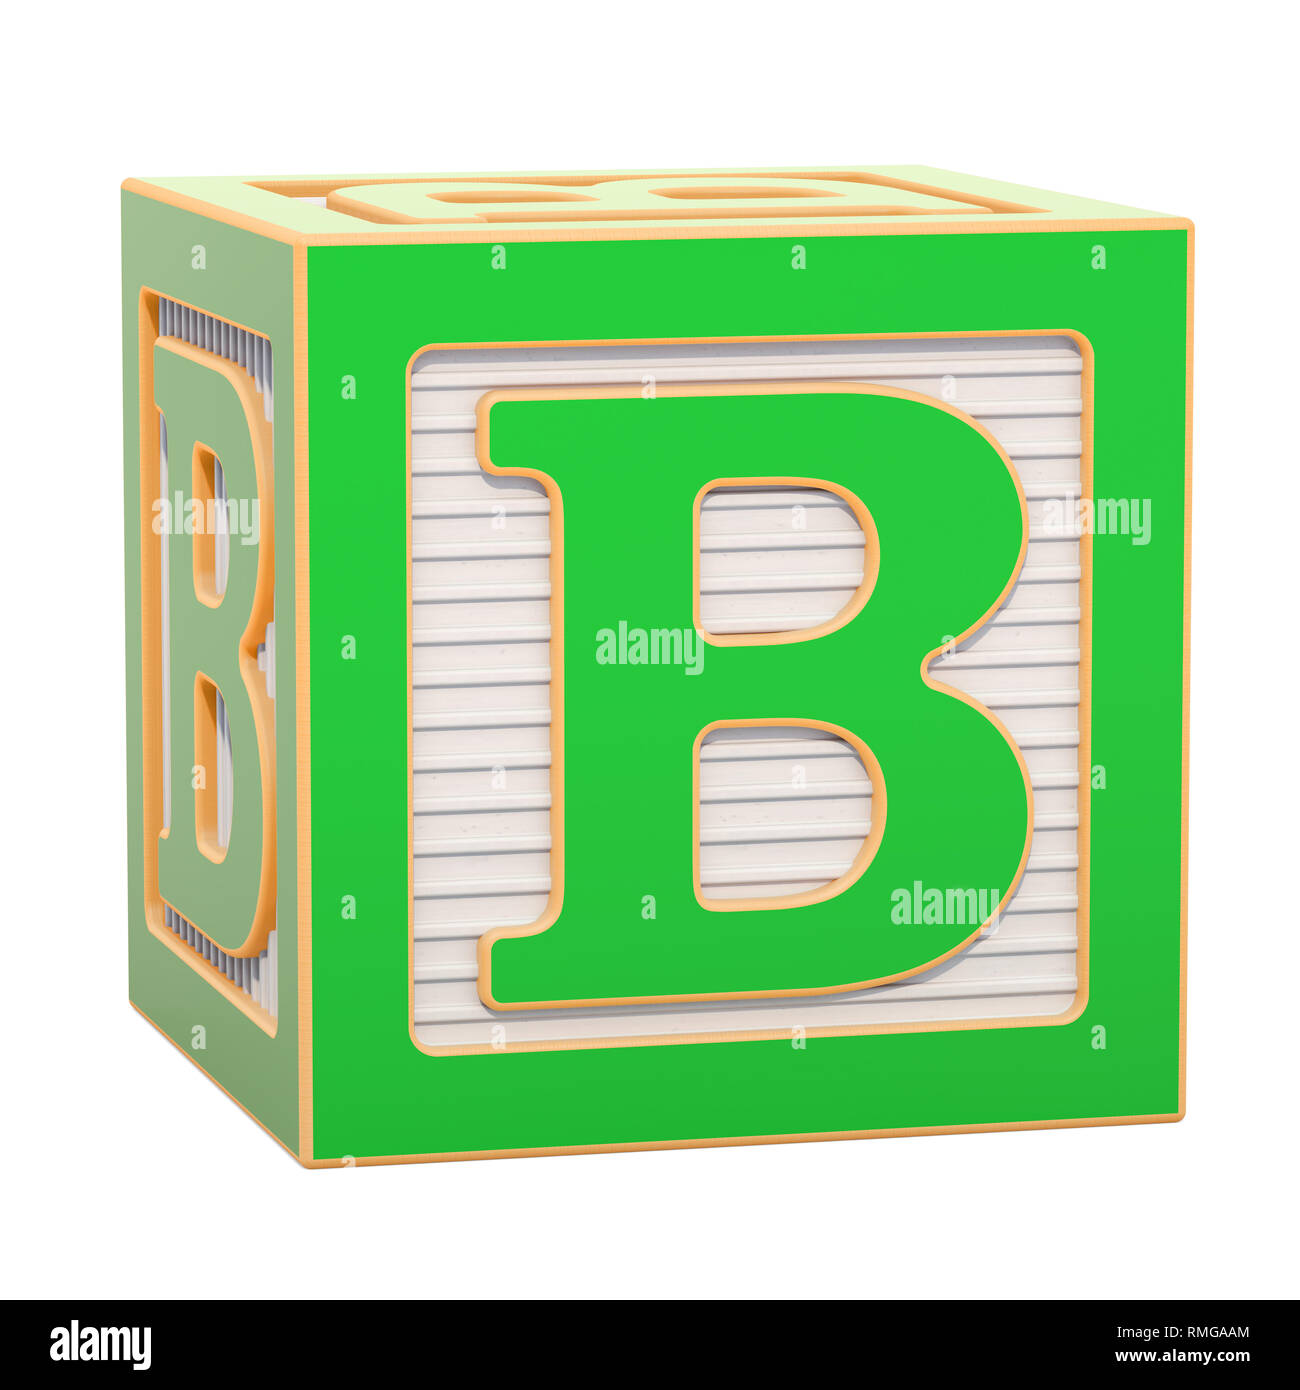 https://c8.alamy.com/comp/RMGAAM/abc-alphabet-wooden-block-with-b-letter-3d-rendering-isolated-on-white-background-RMGAAM.jpg